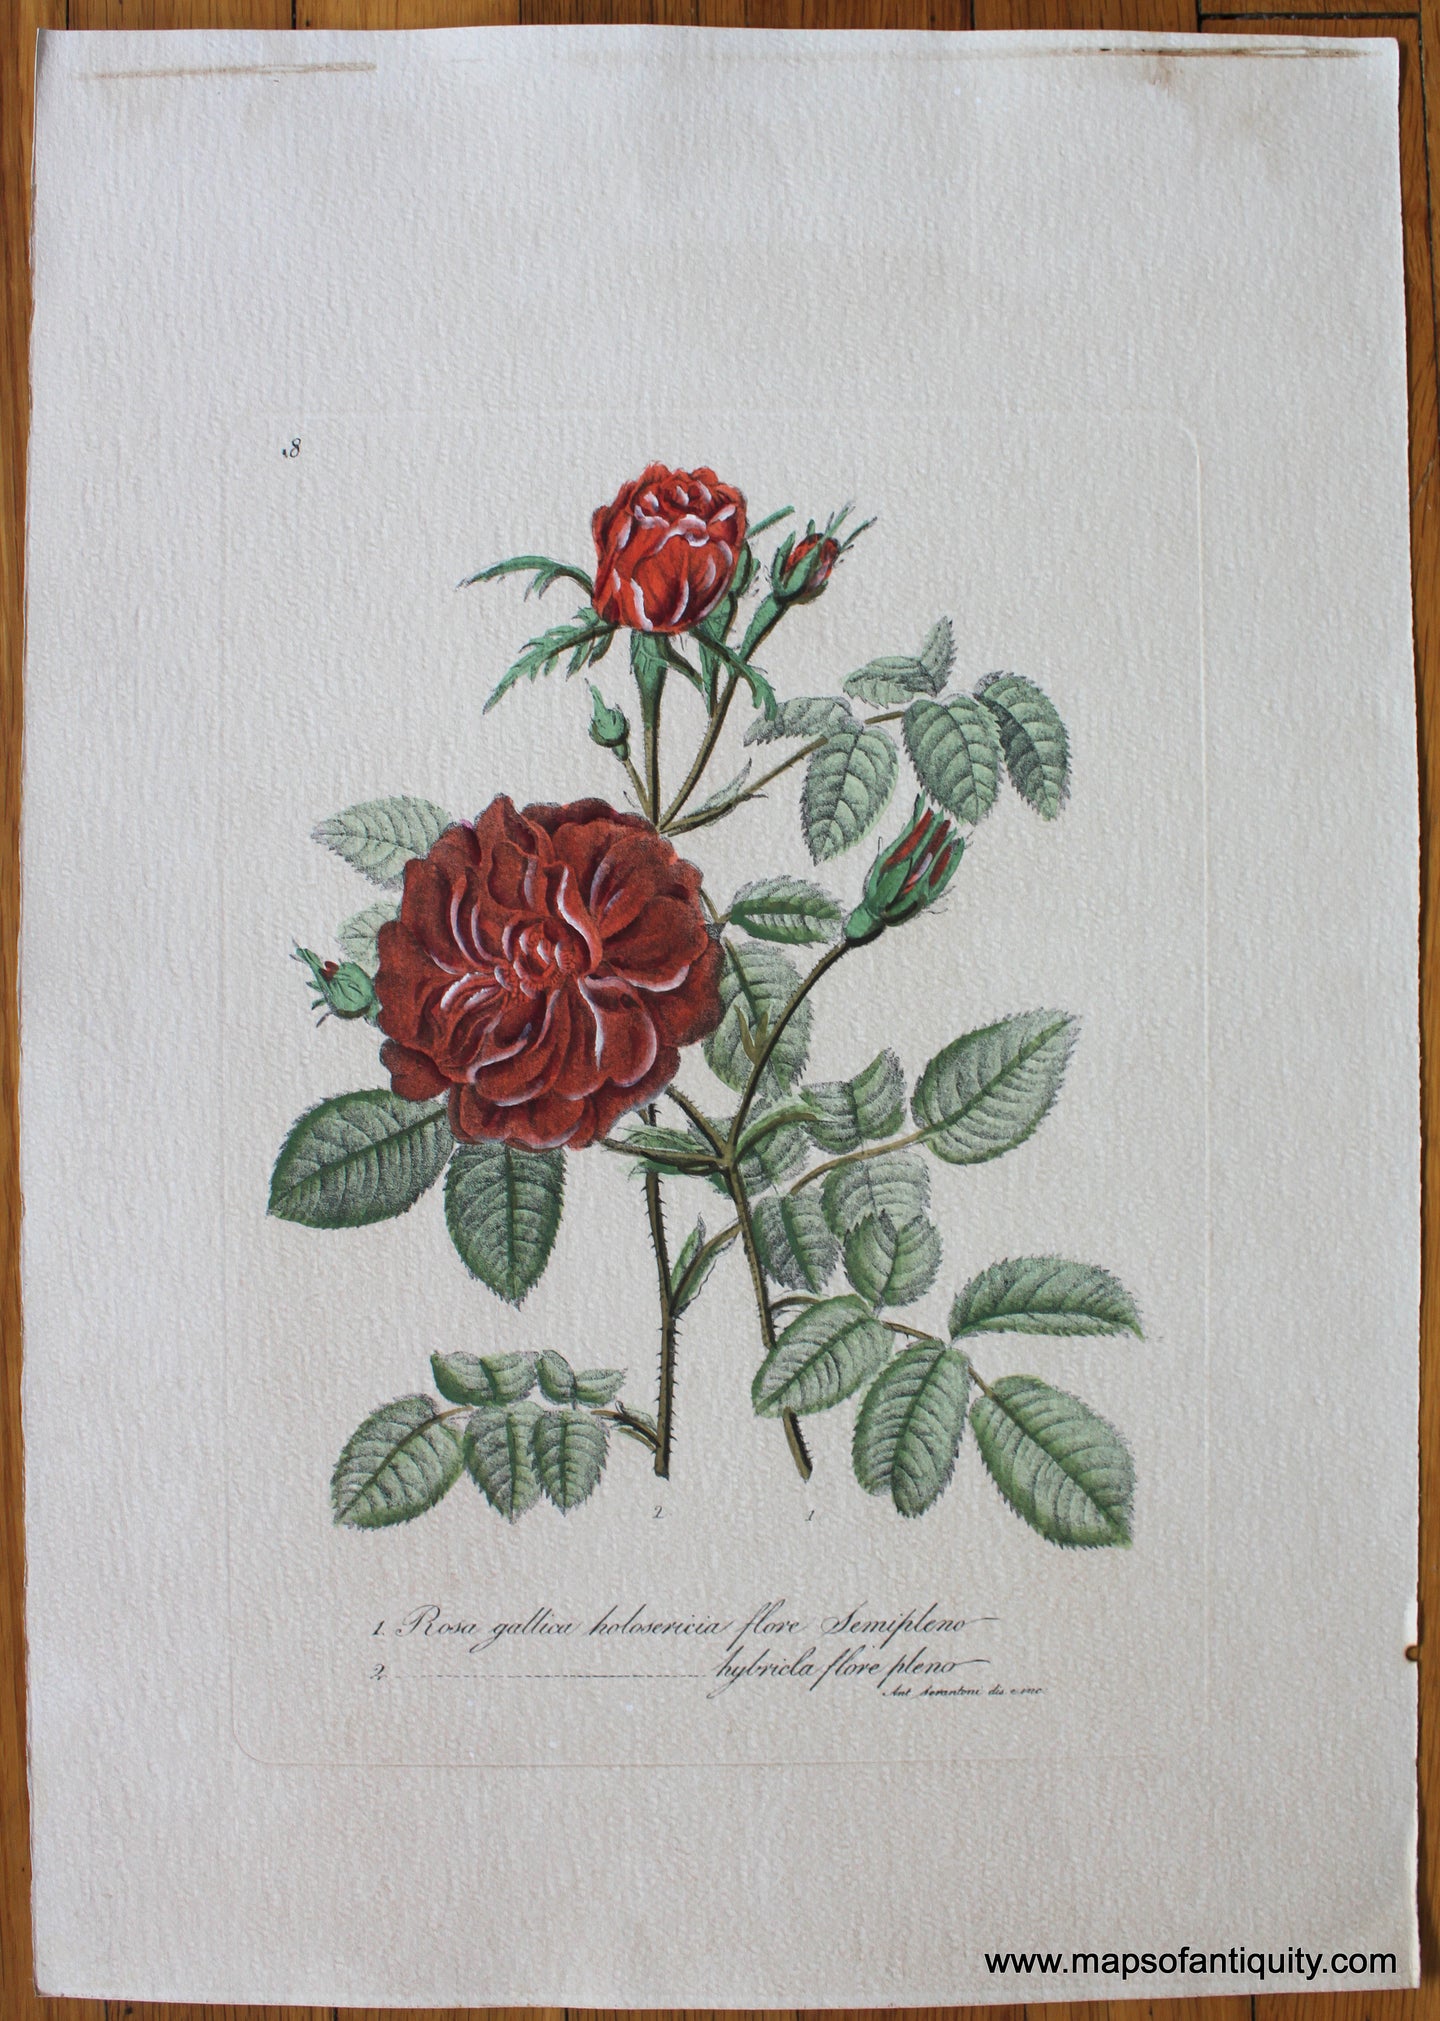 Digitally-Engraved-Specialty-Reproduction-Rosa-gallica-(Reproduction)-Reproduction-Maps-of-Antiquity